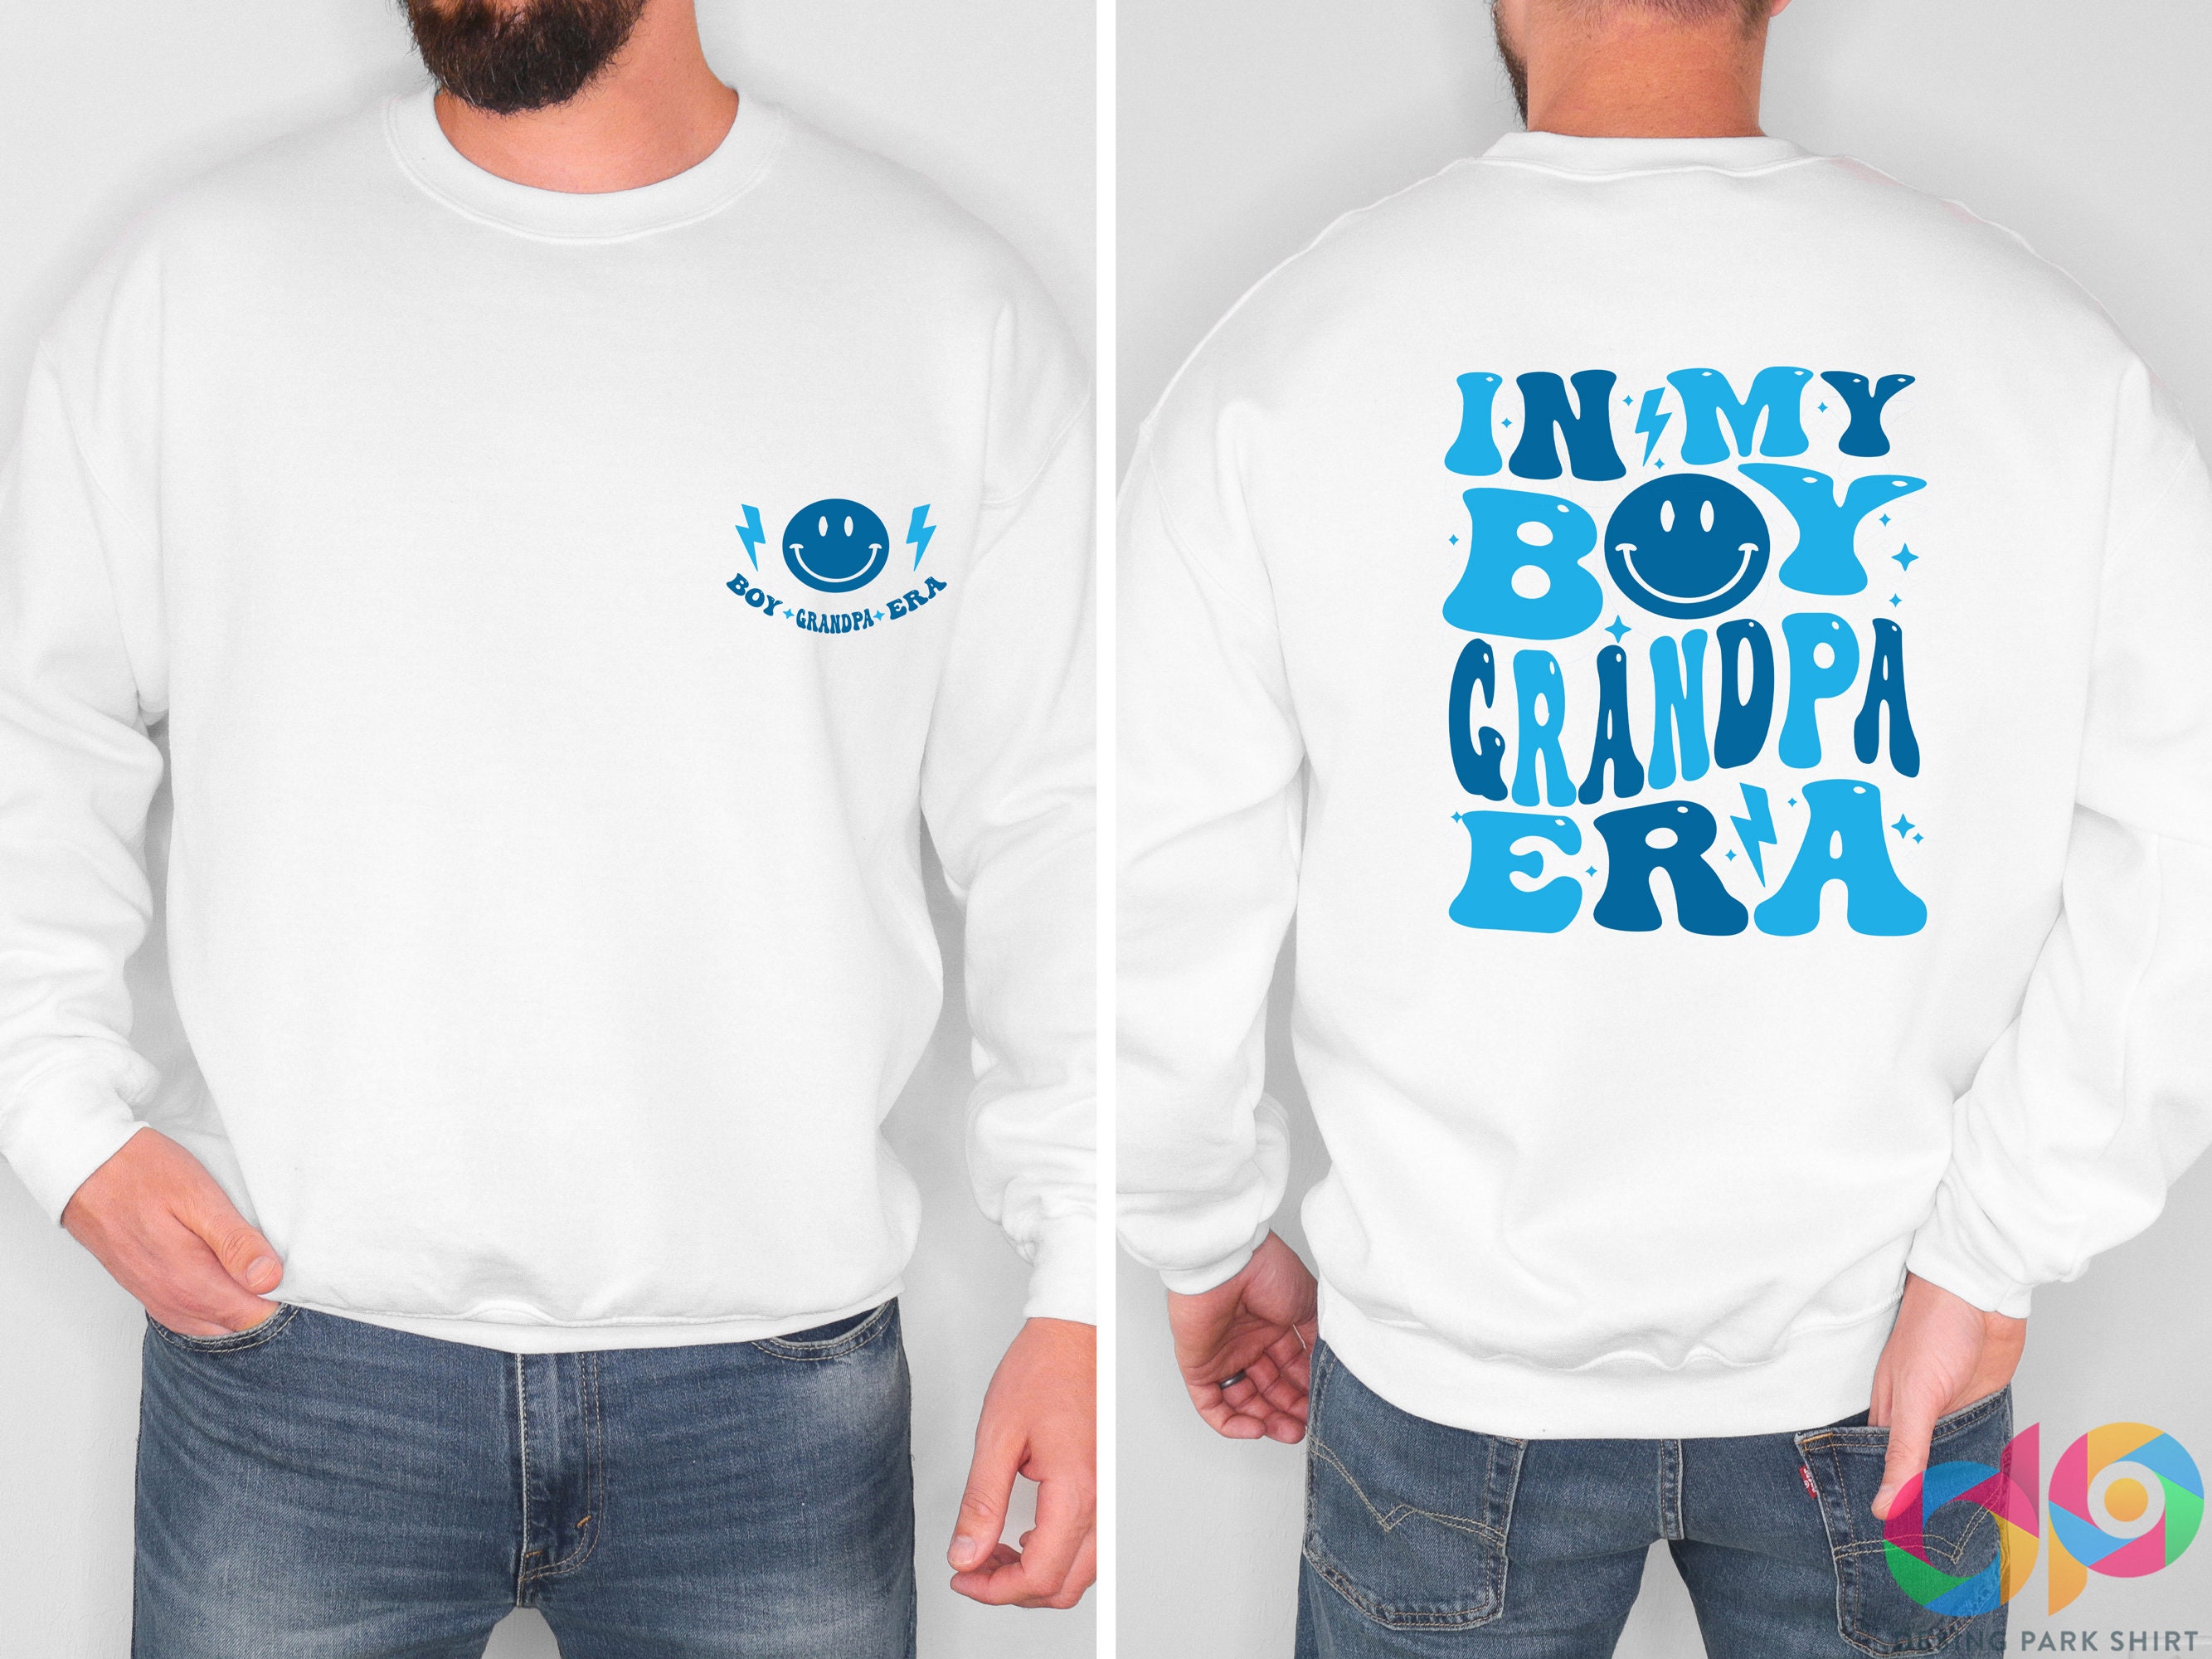 Discover In My Boy Grandpa Era Double Sided Sweatshirts, Fathers Day Gift